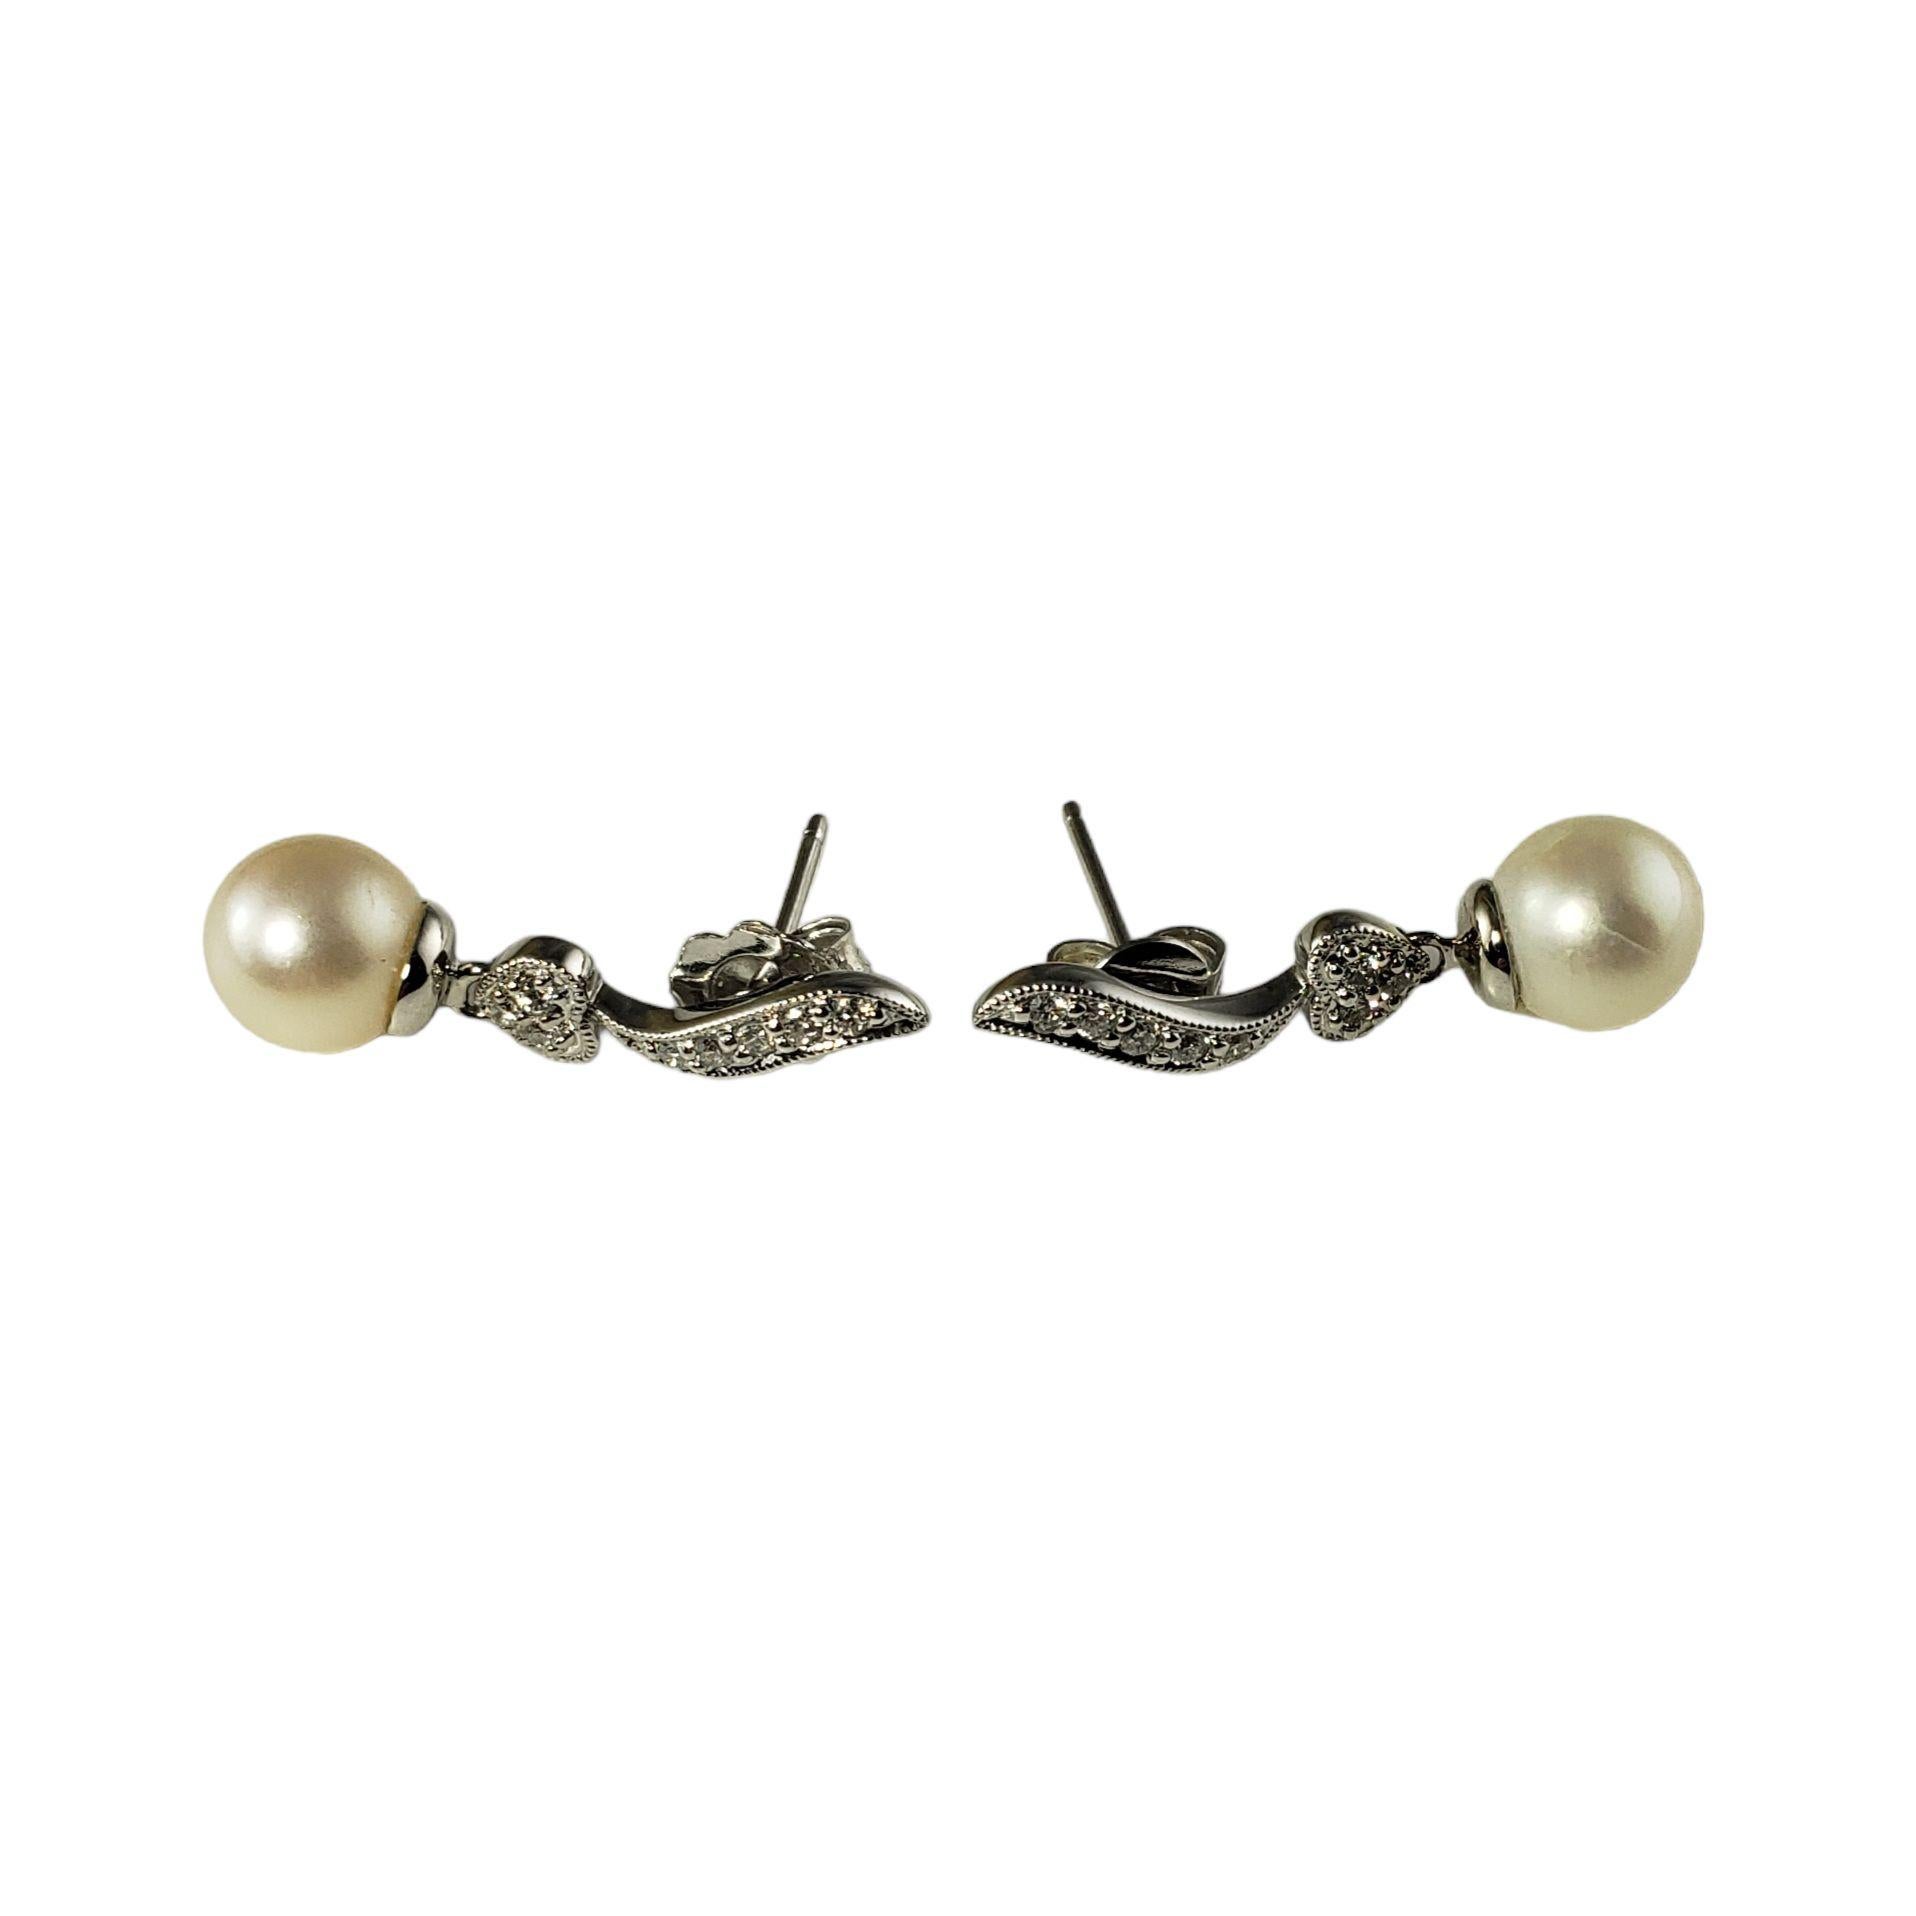  14 Karat White Gold Pearl and Diamond Earrings For Sale 1